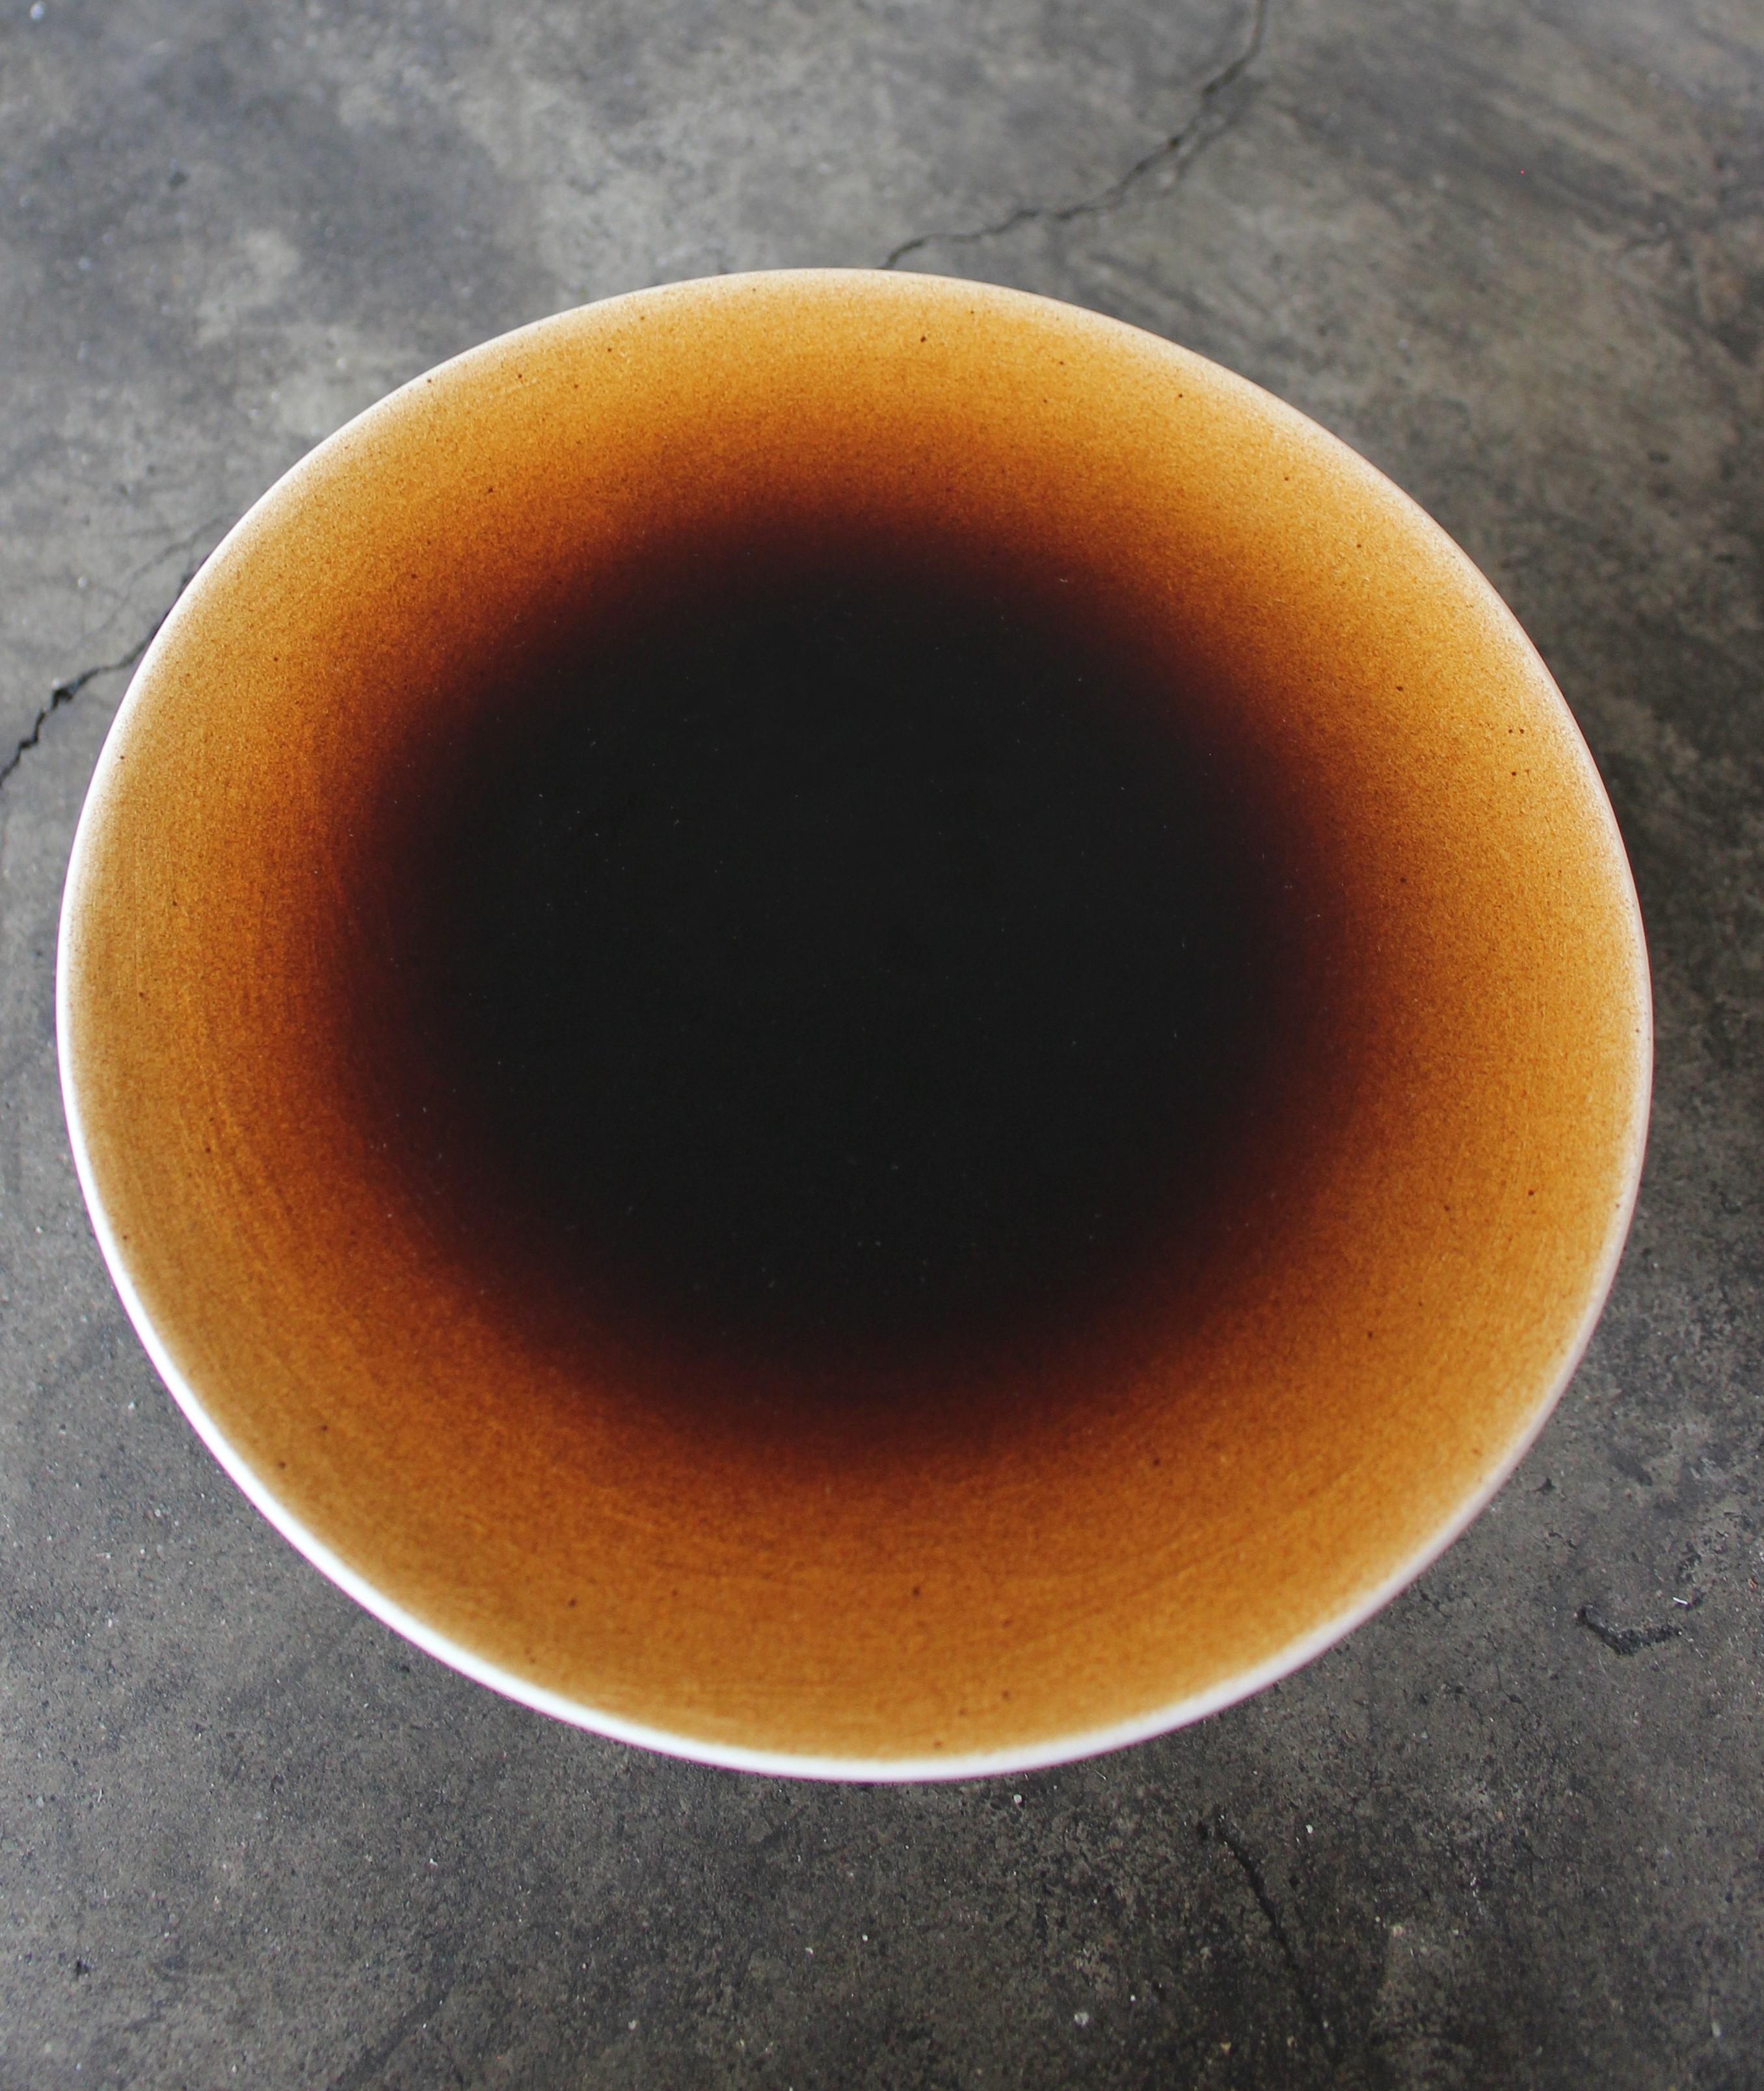 Ott another paradigmatic handmade ceramic high-plate by Studio Yoon Seok-hyeon,
2019
Dimensions: W 18 x H 10 cm
Materials: Ott(Natural resin from Ott tree), porcelain
650g

It is available to customize various colors in Ott's natural color